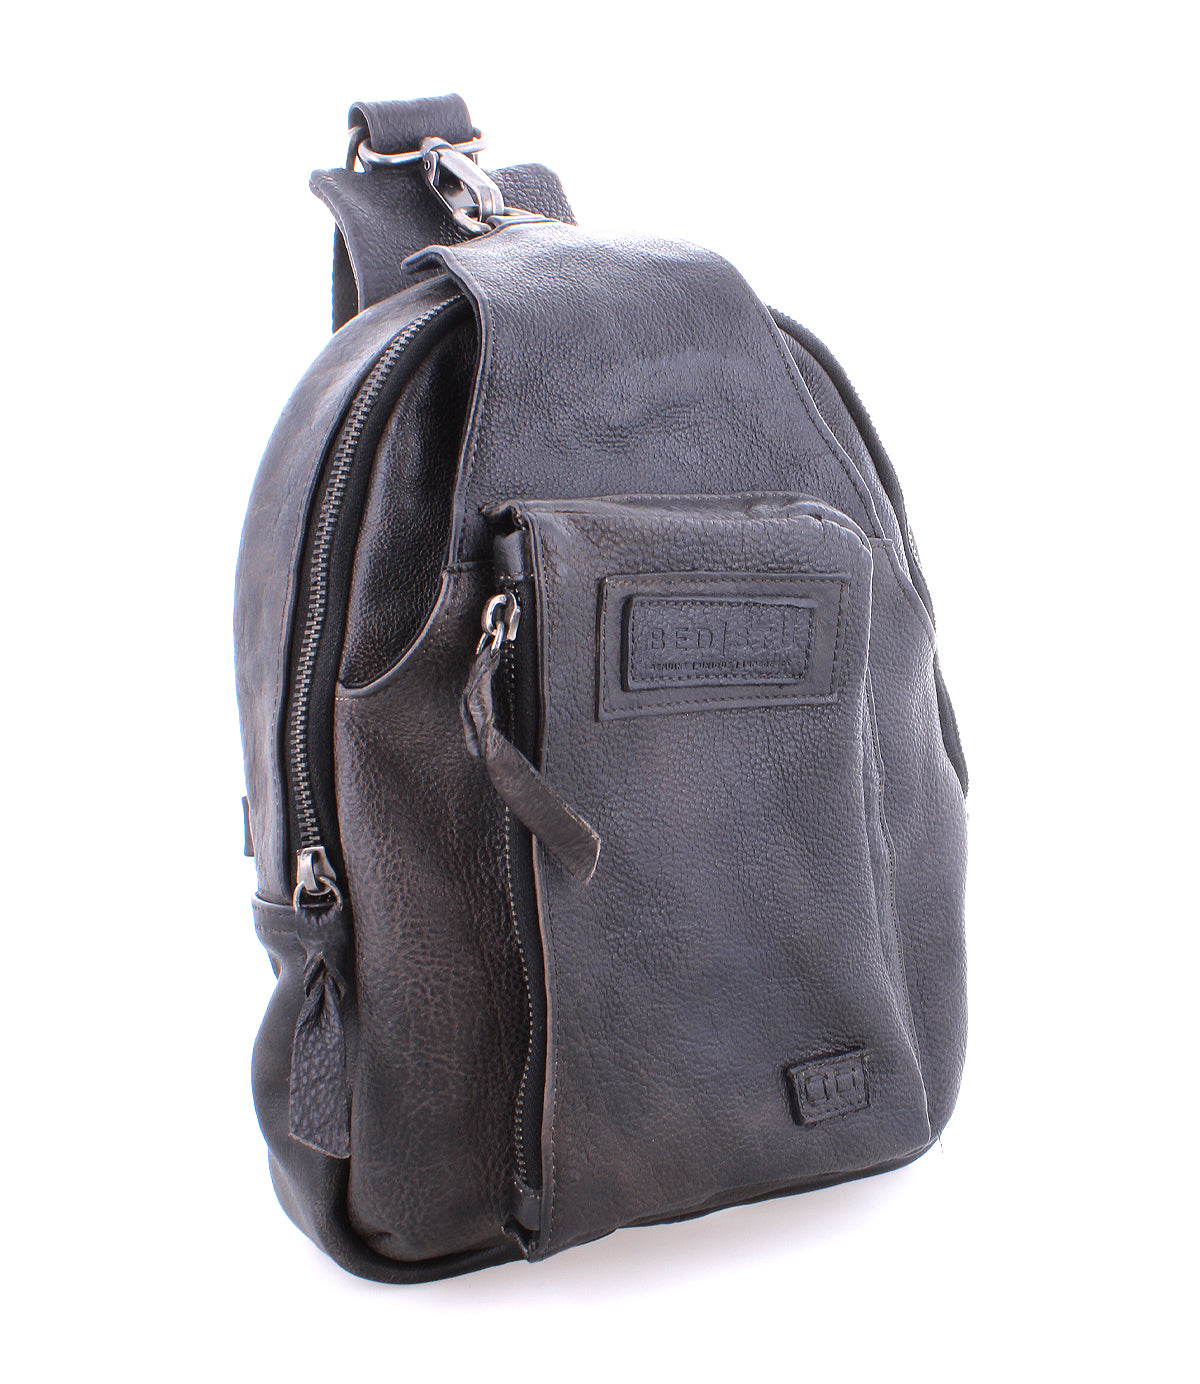 Black leather Beau sling backpack by Bed Stu isolated on a white background.